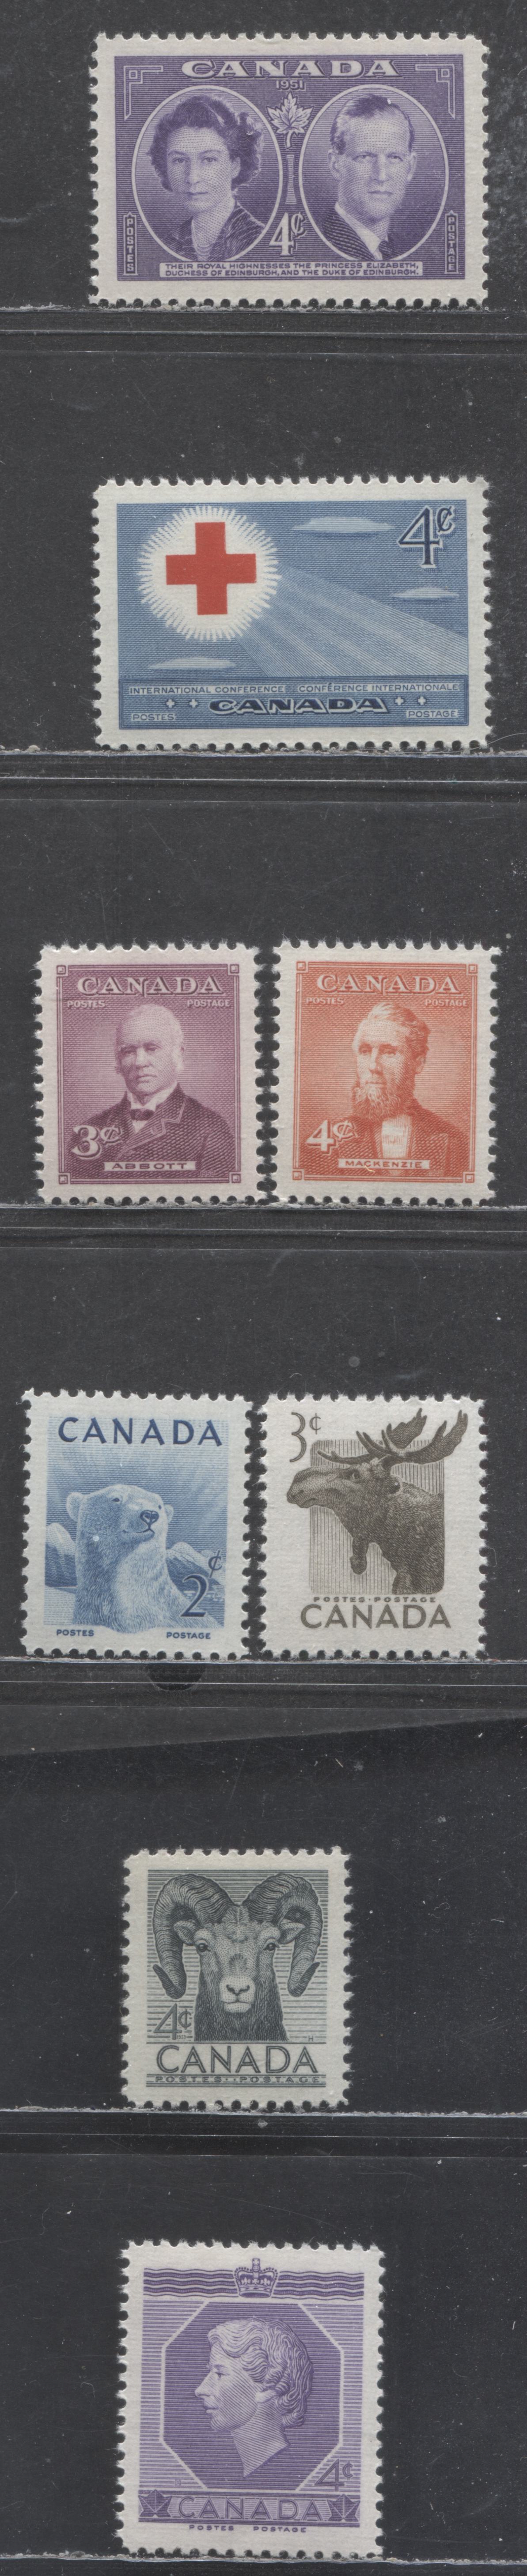 Canada #315, 317-319, 322-324, 330 2c-4c Various Colours Various Subjects, 1951-1953 Royal Visit Issue - 1953 Coronation Issue, 8 VFNH Singles, Horizontally Ribbed Paper, Cream & Yellowish Cream Semi-Gloss Gum All Selected For Centering